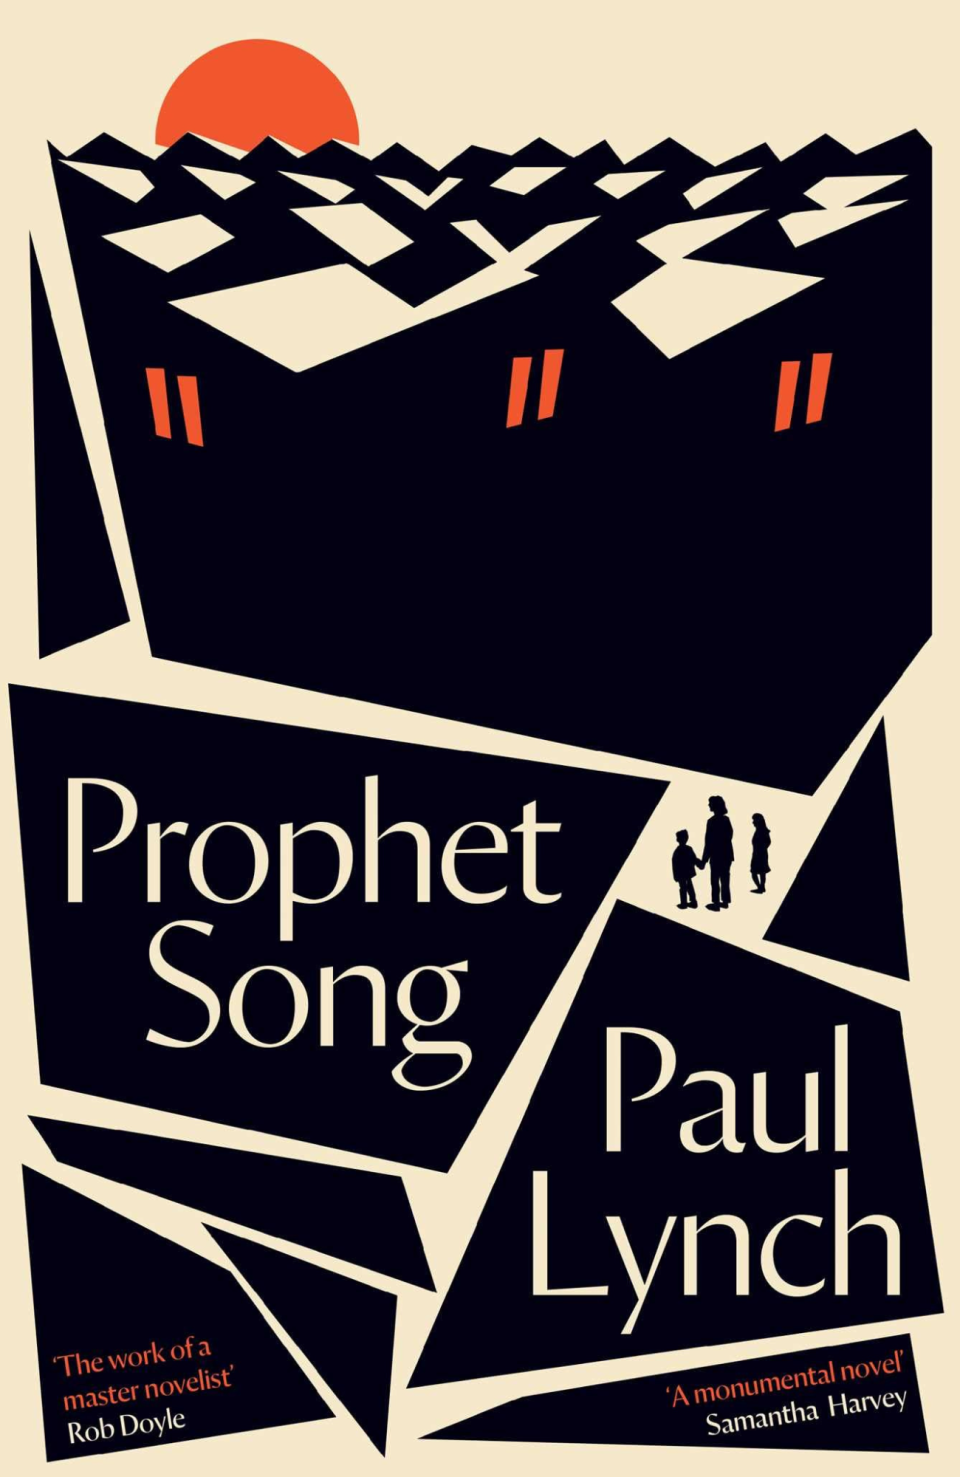 Book cover of Prophet Song by Paul Lynch - graphic of houses with red windows